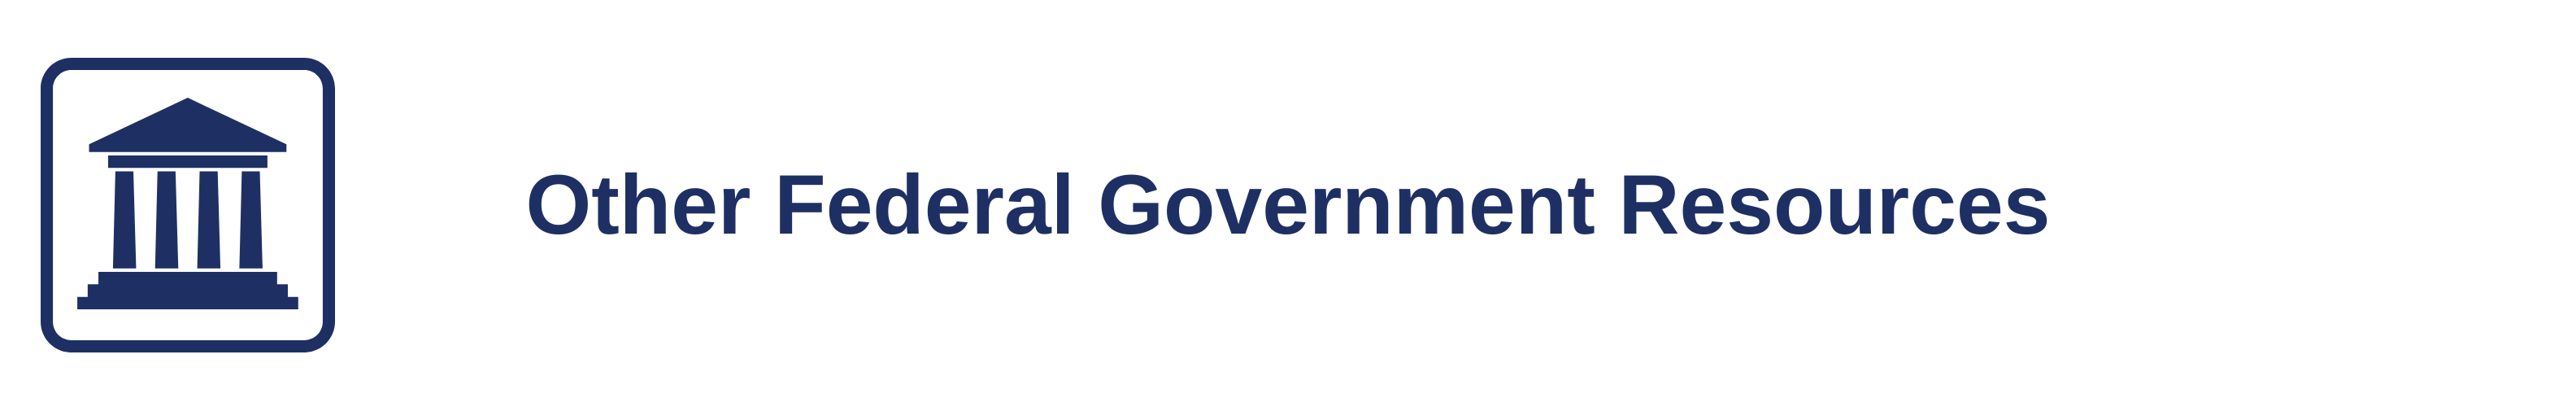 Other Federal Government Resources 